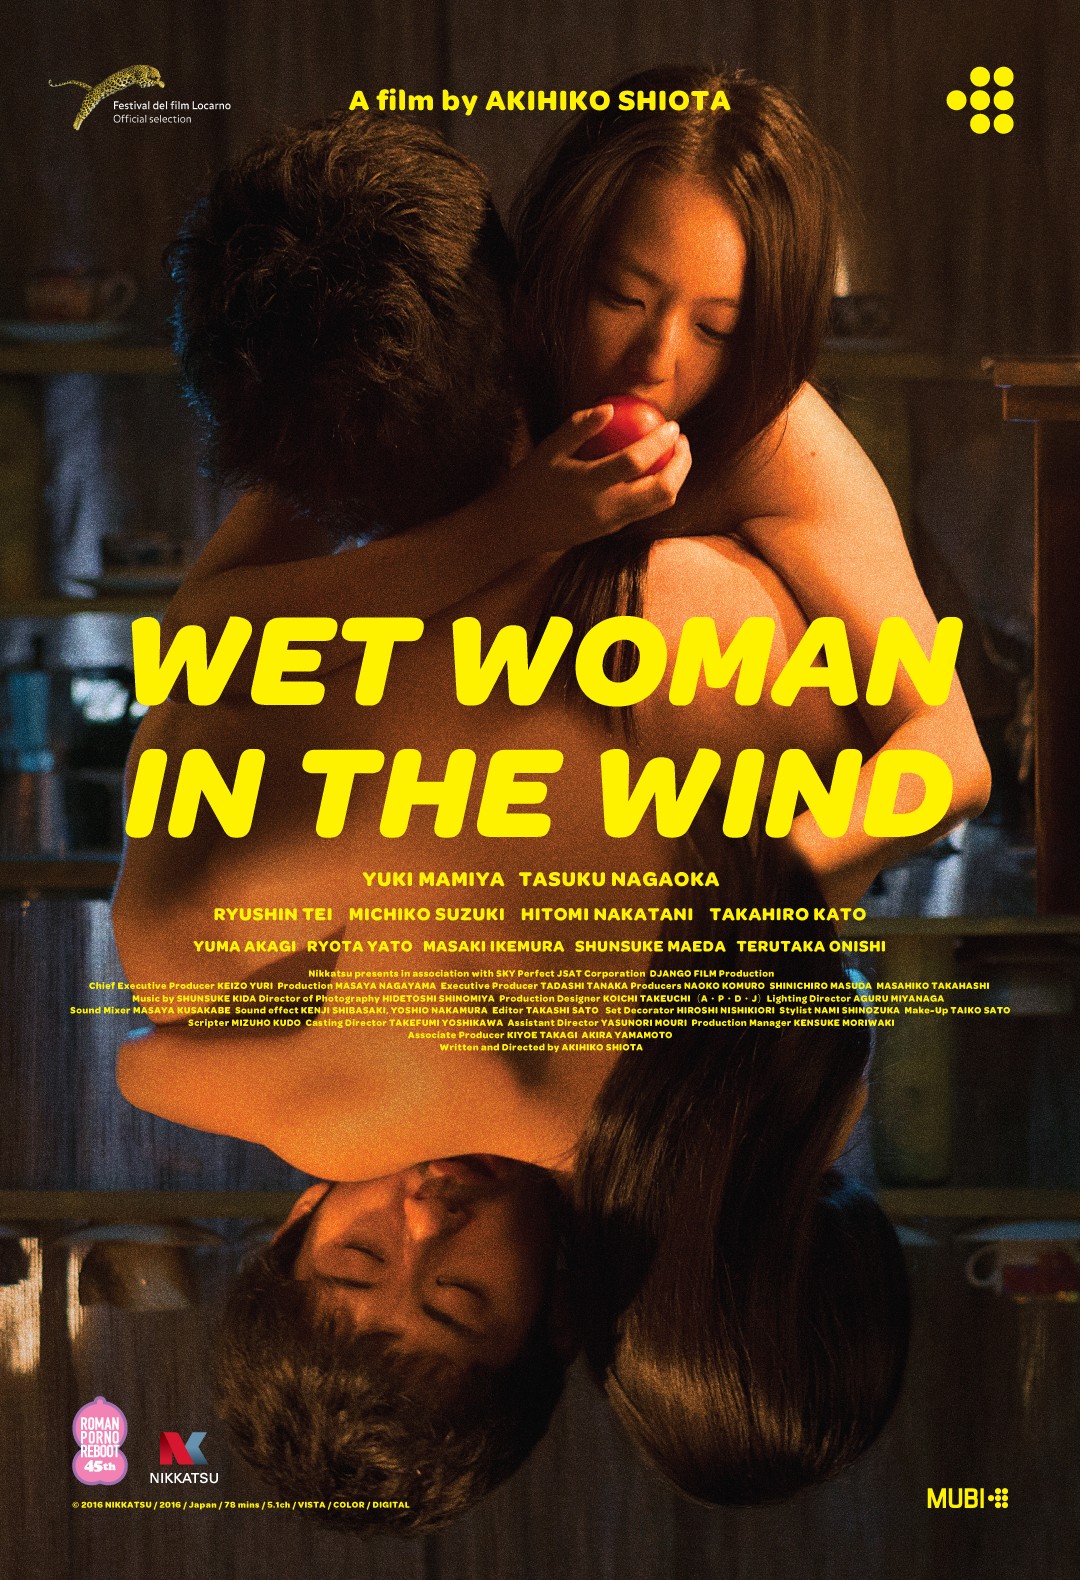 Wet Woman in the Wind - Rotten Tomatoes